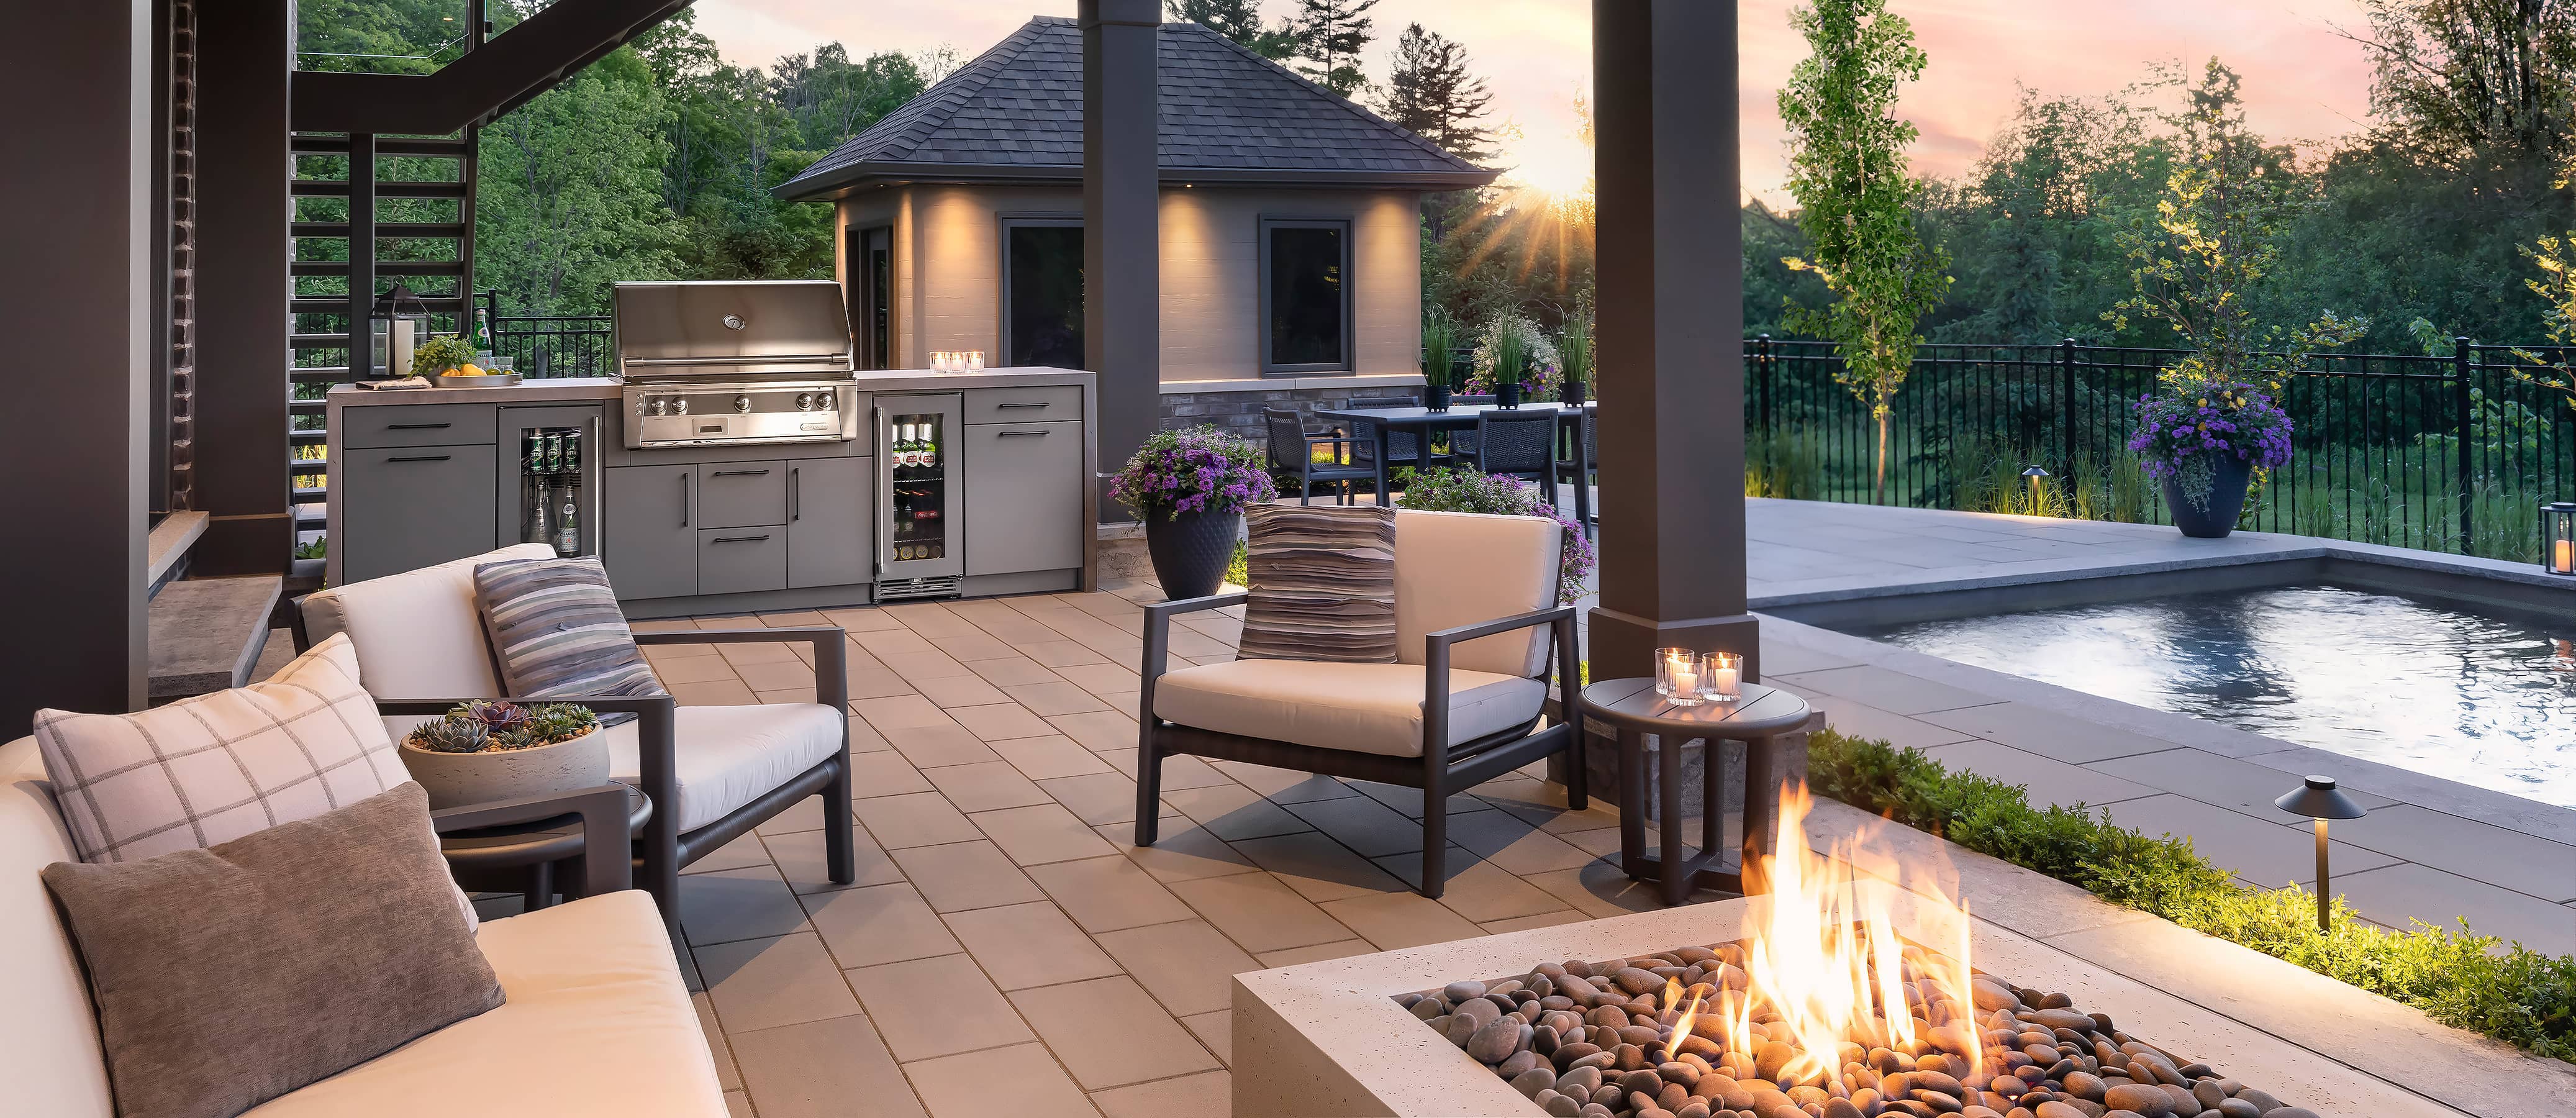 outdoor kitchen including grill, bar fridge, fire pit, pool in a backyard north of Toronto near sunset